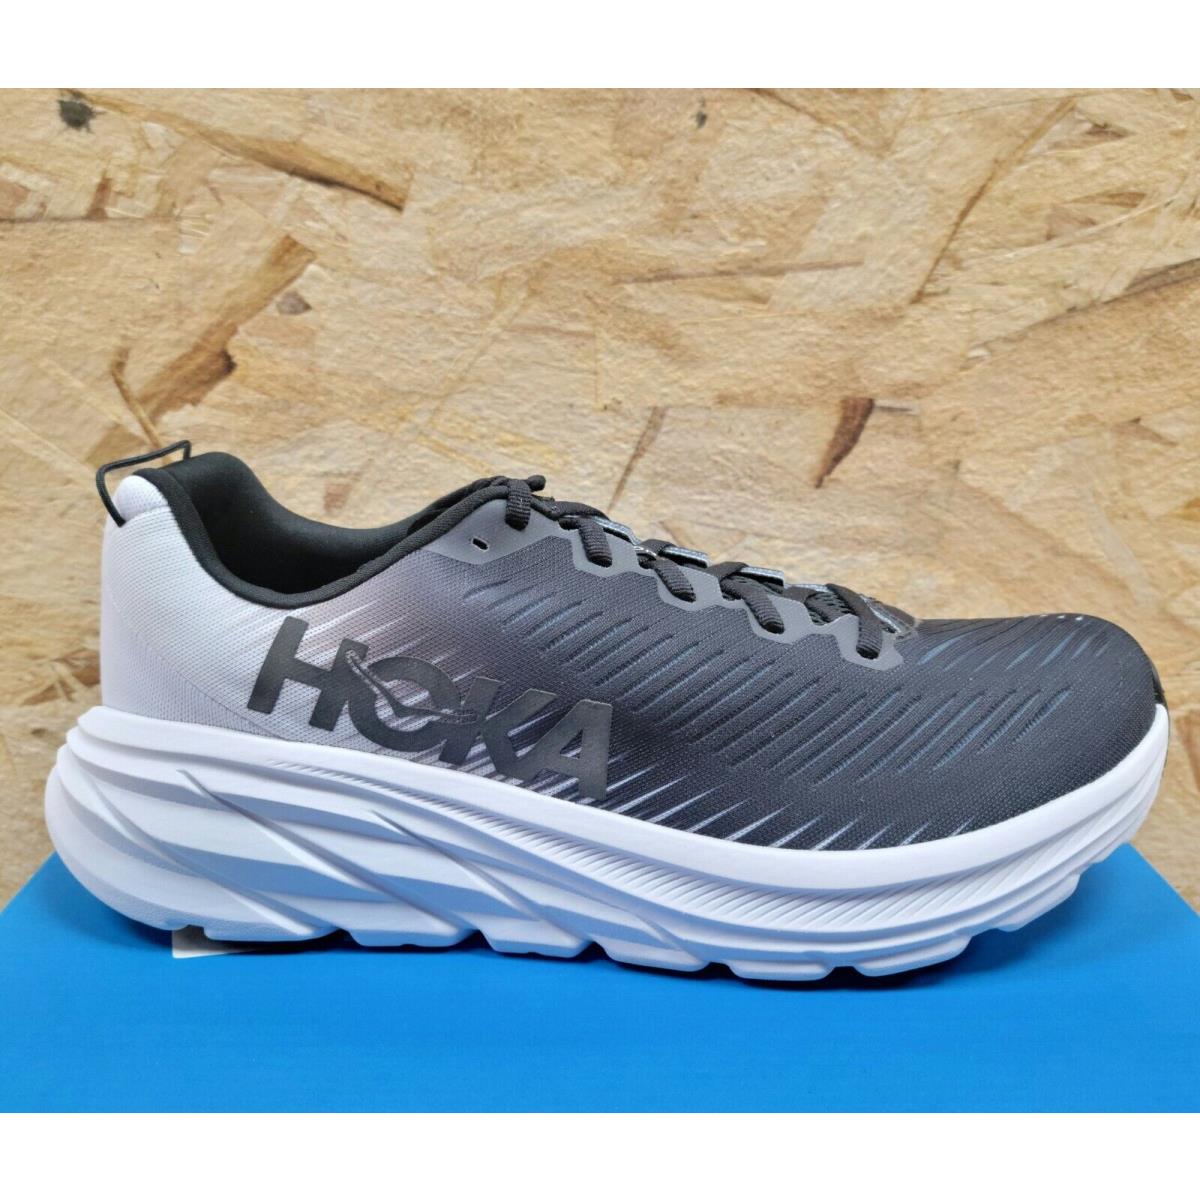 Hoka One One Women`s Rincon 3 Black/white Lightweight Running and Jogging Shoes